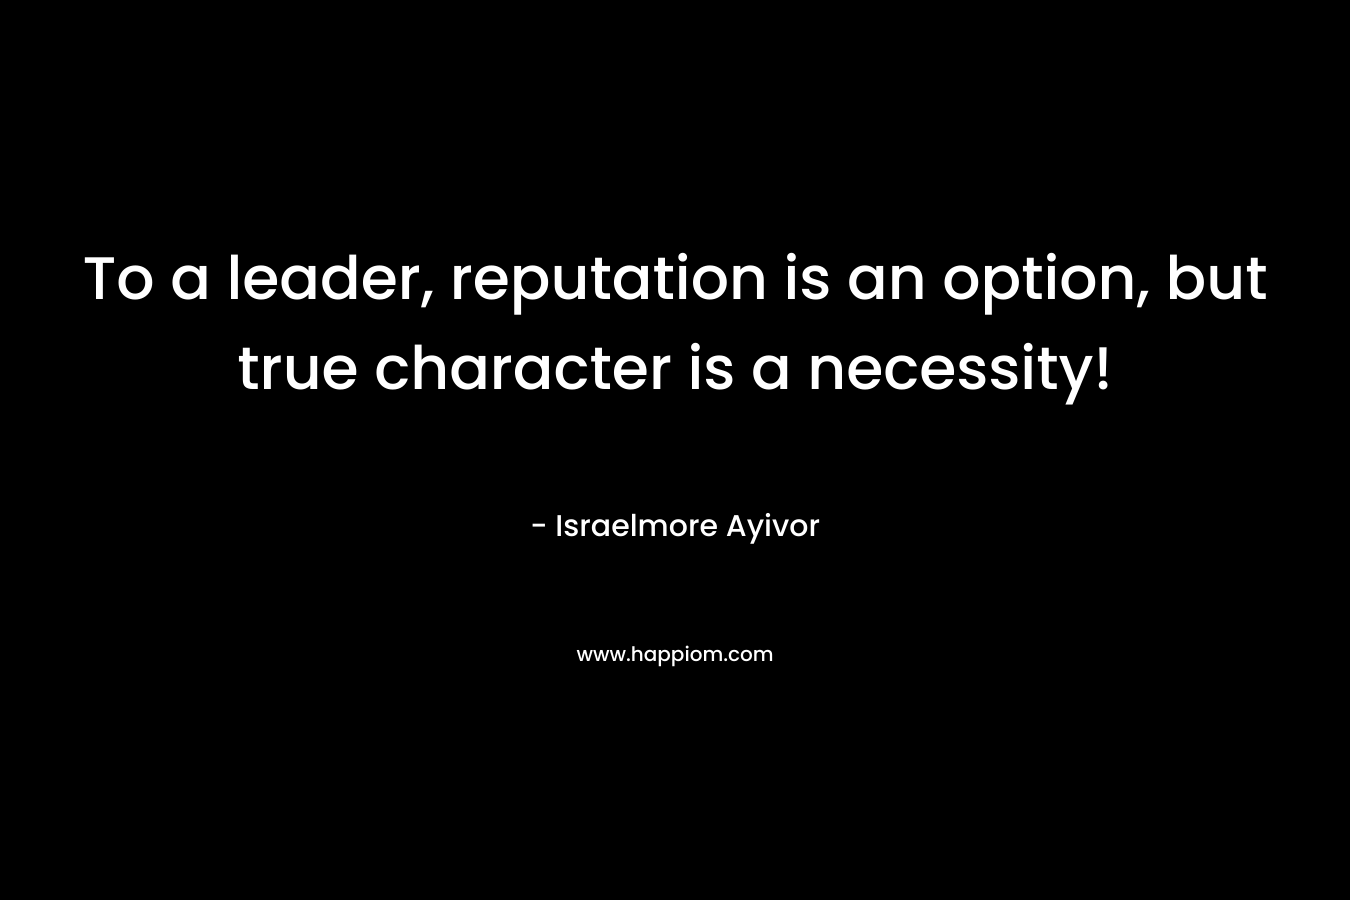 To a leader, reputation is an option, but true character is a necessity!